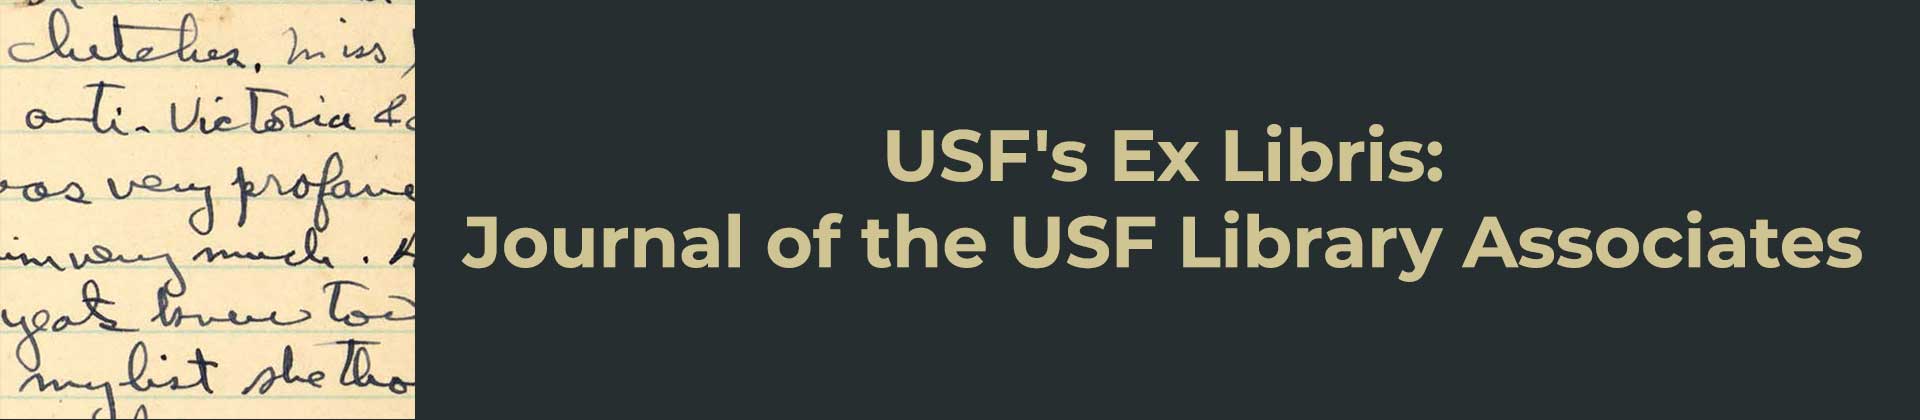 USF’s Ex Libris:  Journal of the USF Library Associates